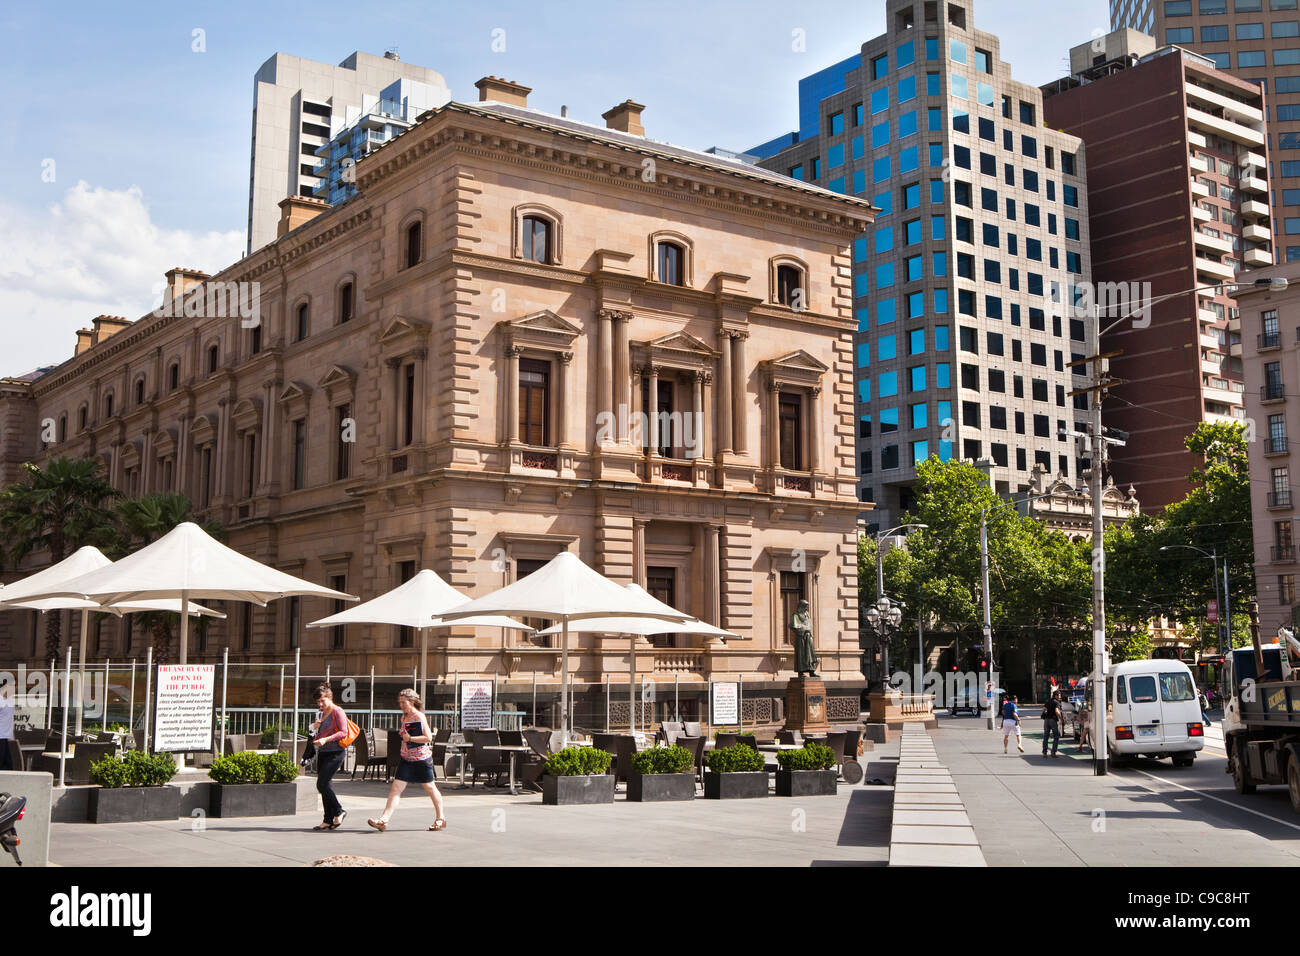 The old Treasury Building on spring street Collins st in Melbourne Australia. on the edge of city CBD Stock Photo